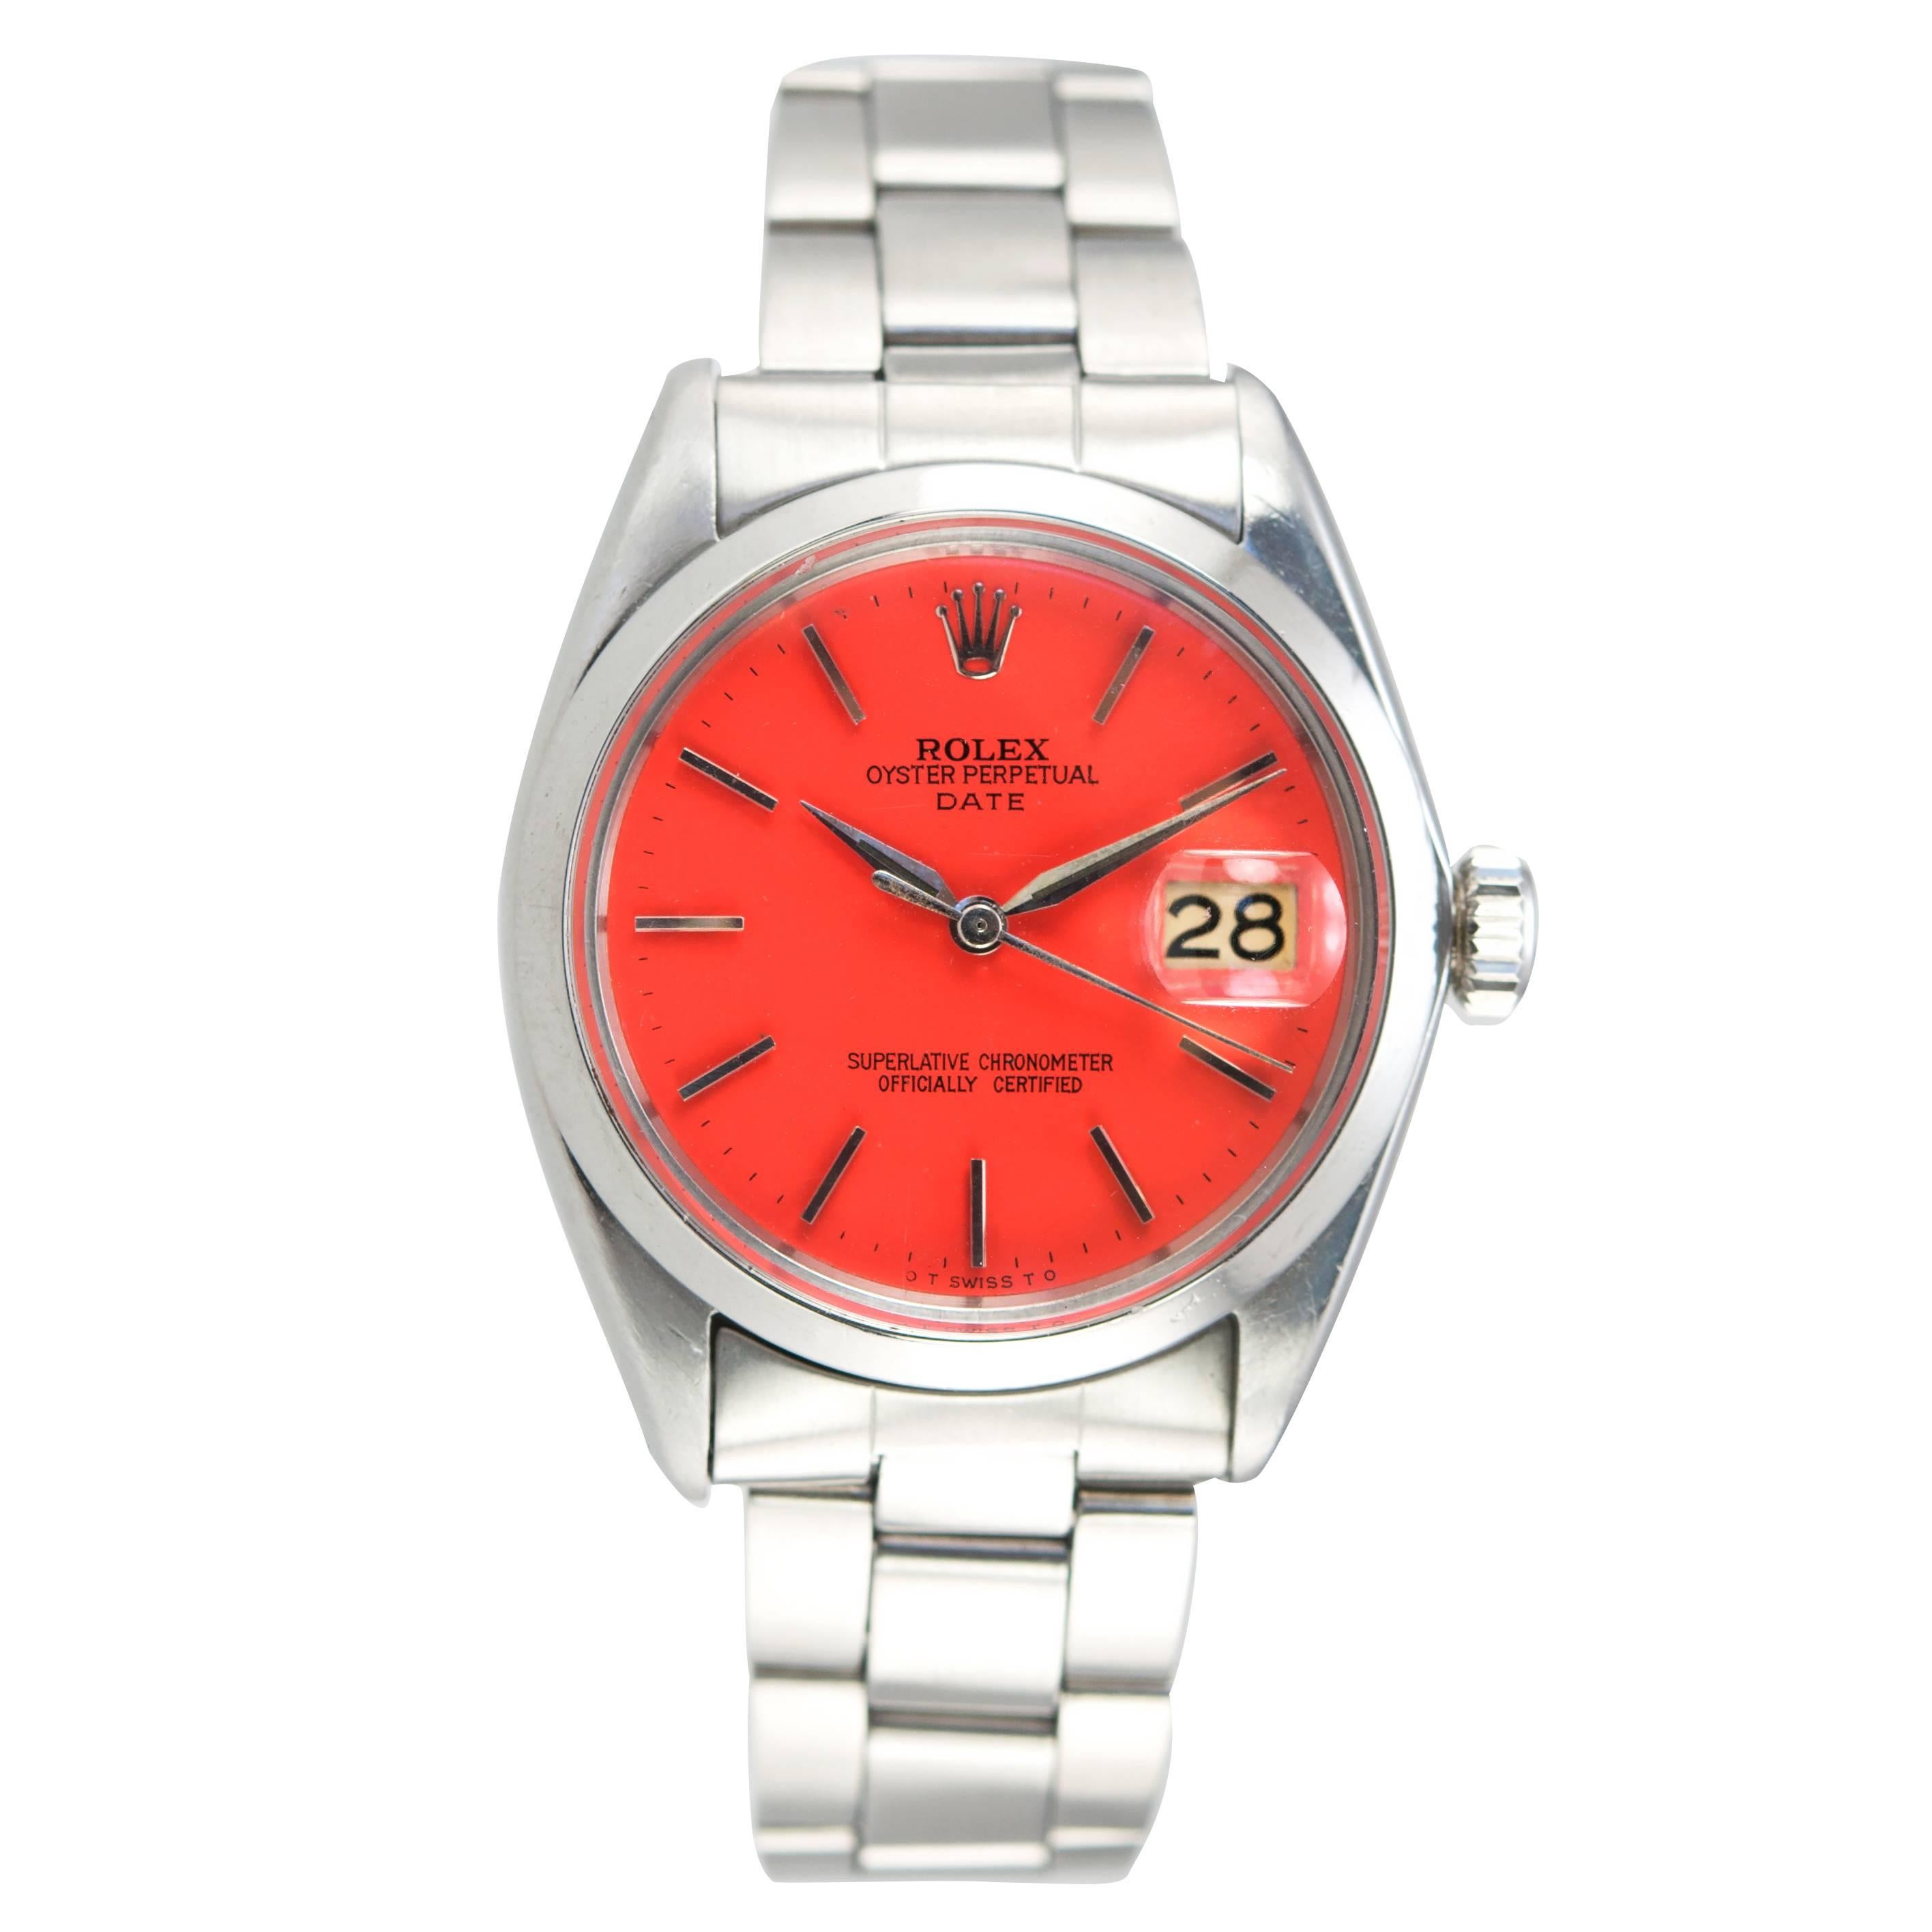 Rolex Stainless Steel Date Custom Coral Dial Wristwatch Ref 1500